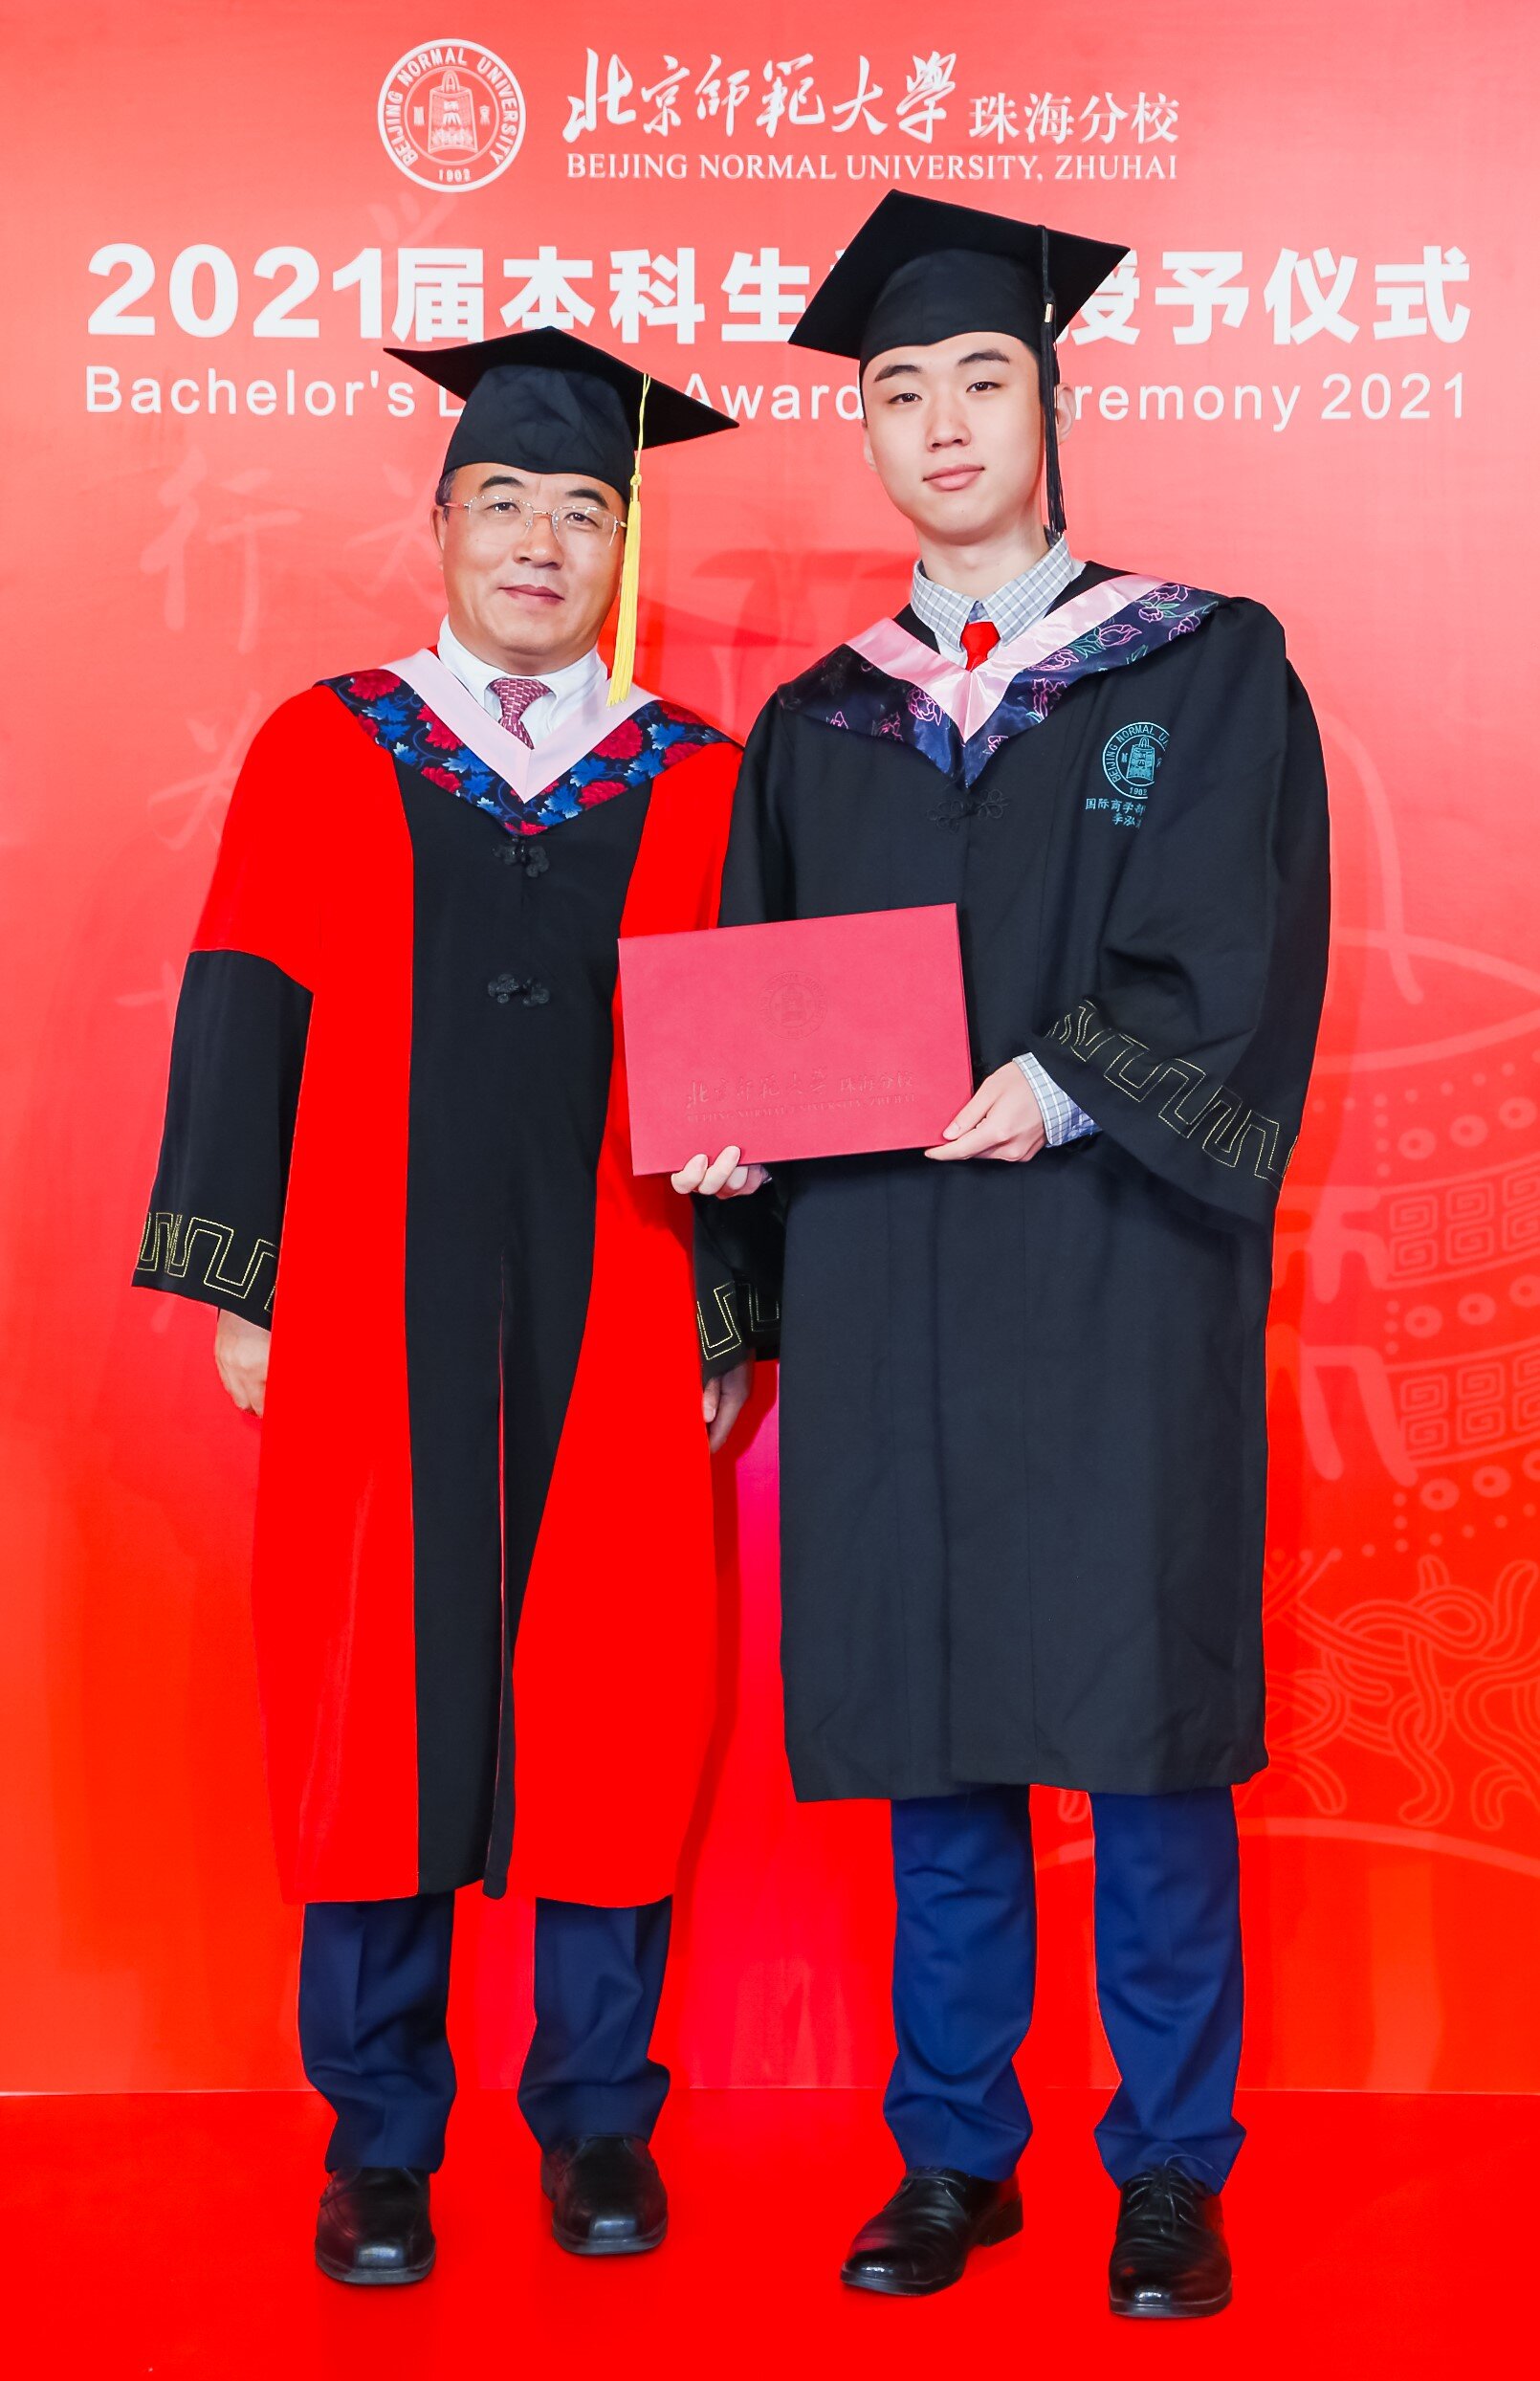   Li Honglin is awarded his degree by Prof. Zheng Guomin, Assistant to the President and Vice Provost, Beijing Normal University, and Deputy Director of the Administrative Committee and Provost, Beijing Normal University at Zhuhai.  